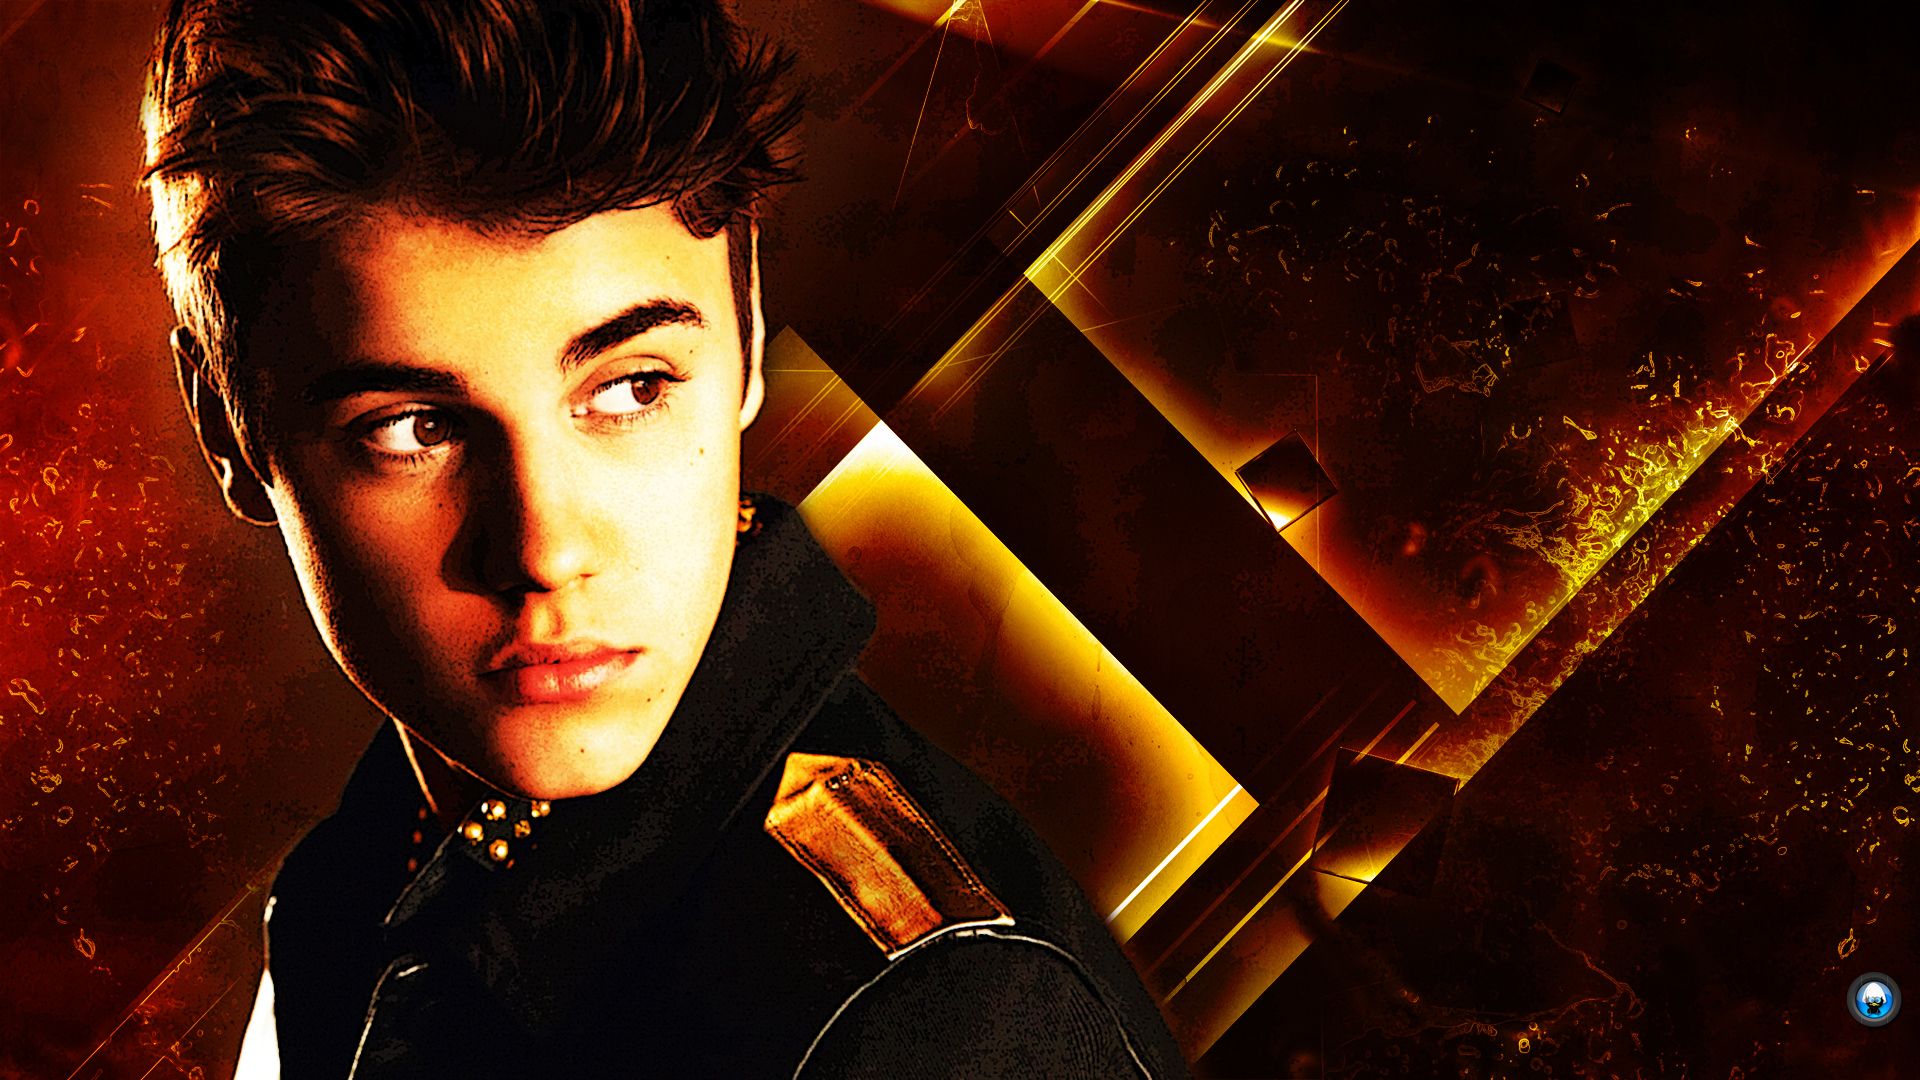 justin bieber wallpaper app,cool,photography,music,movie,flash photography